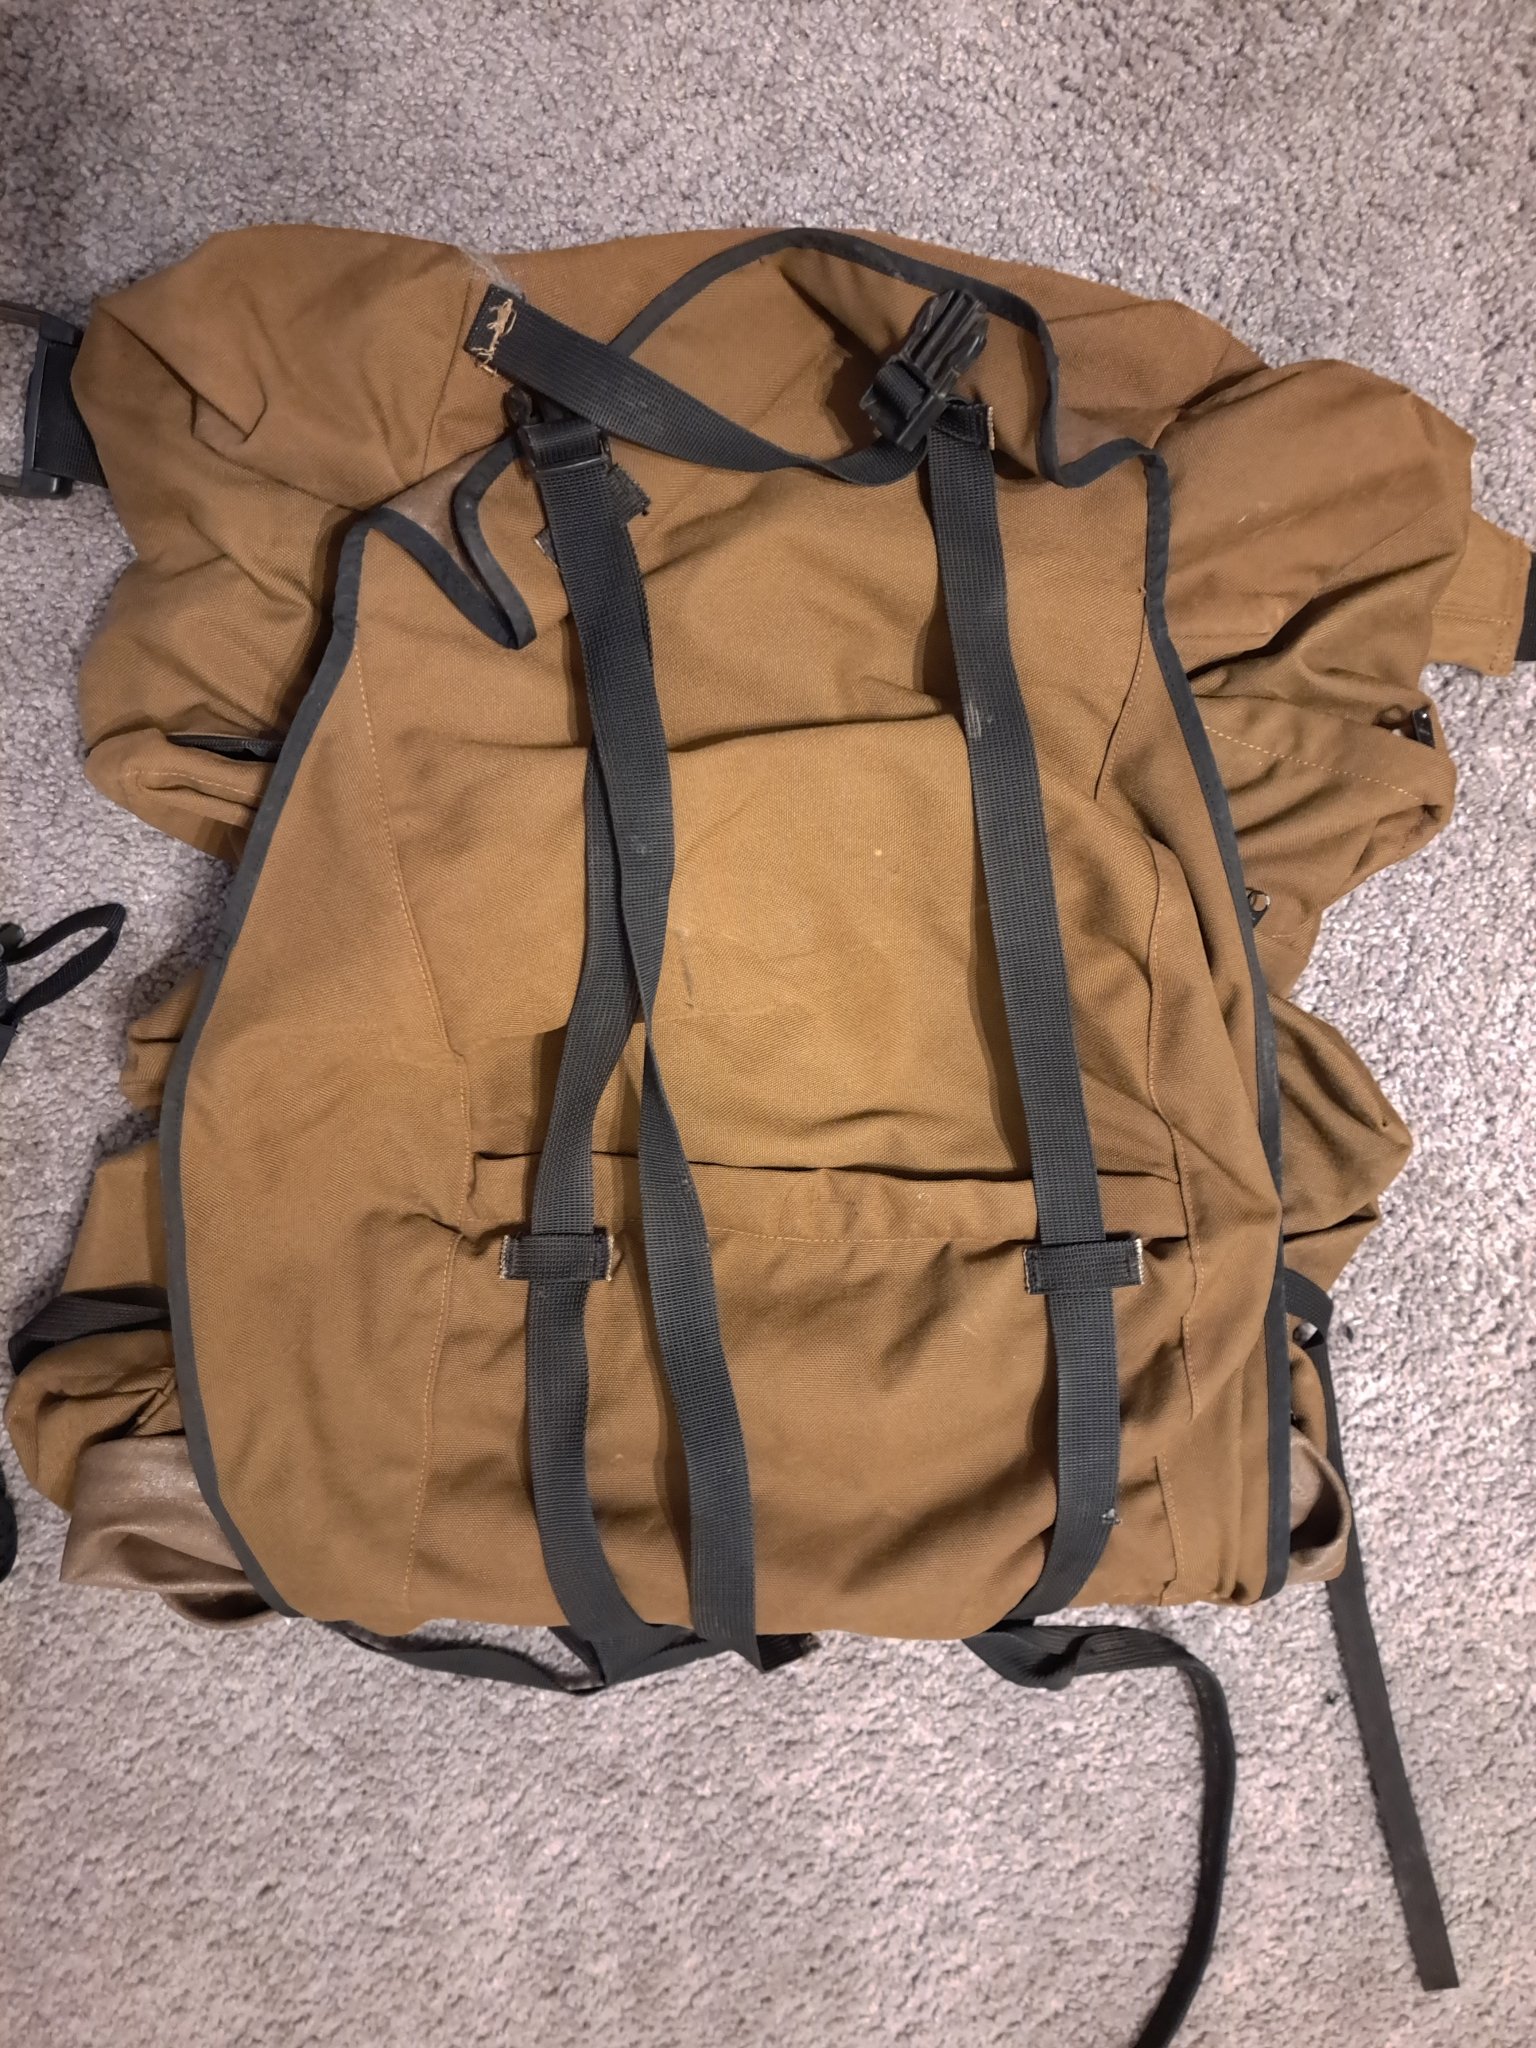 Accessories - WTS: Type 83 Chest-rig & Large Backpack (NOS) | Sniper's ...